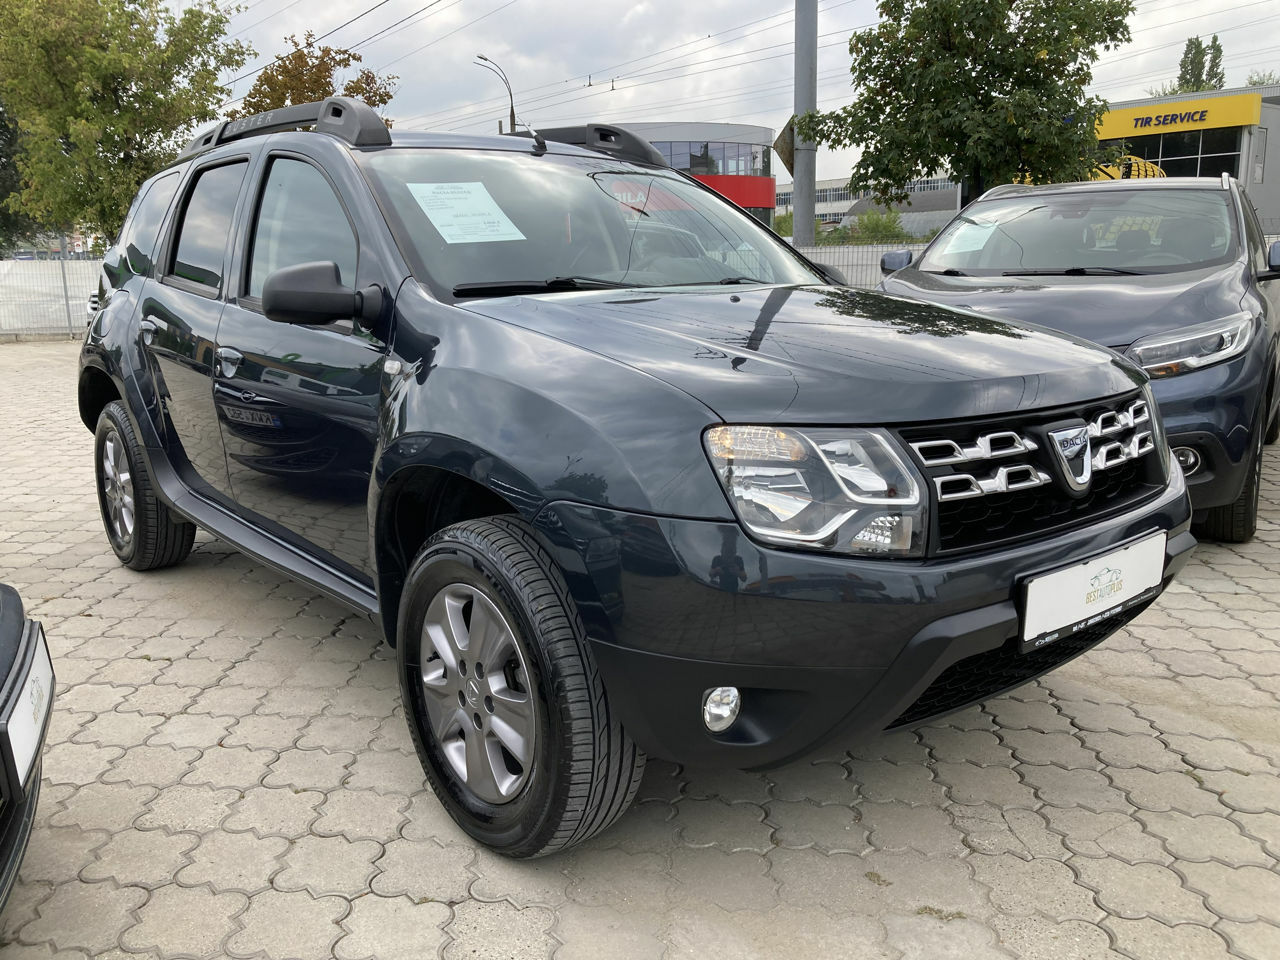 <span style="font-weight: bold;">dacia duster</span>